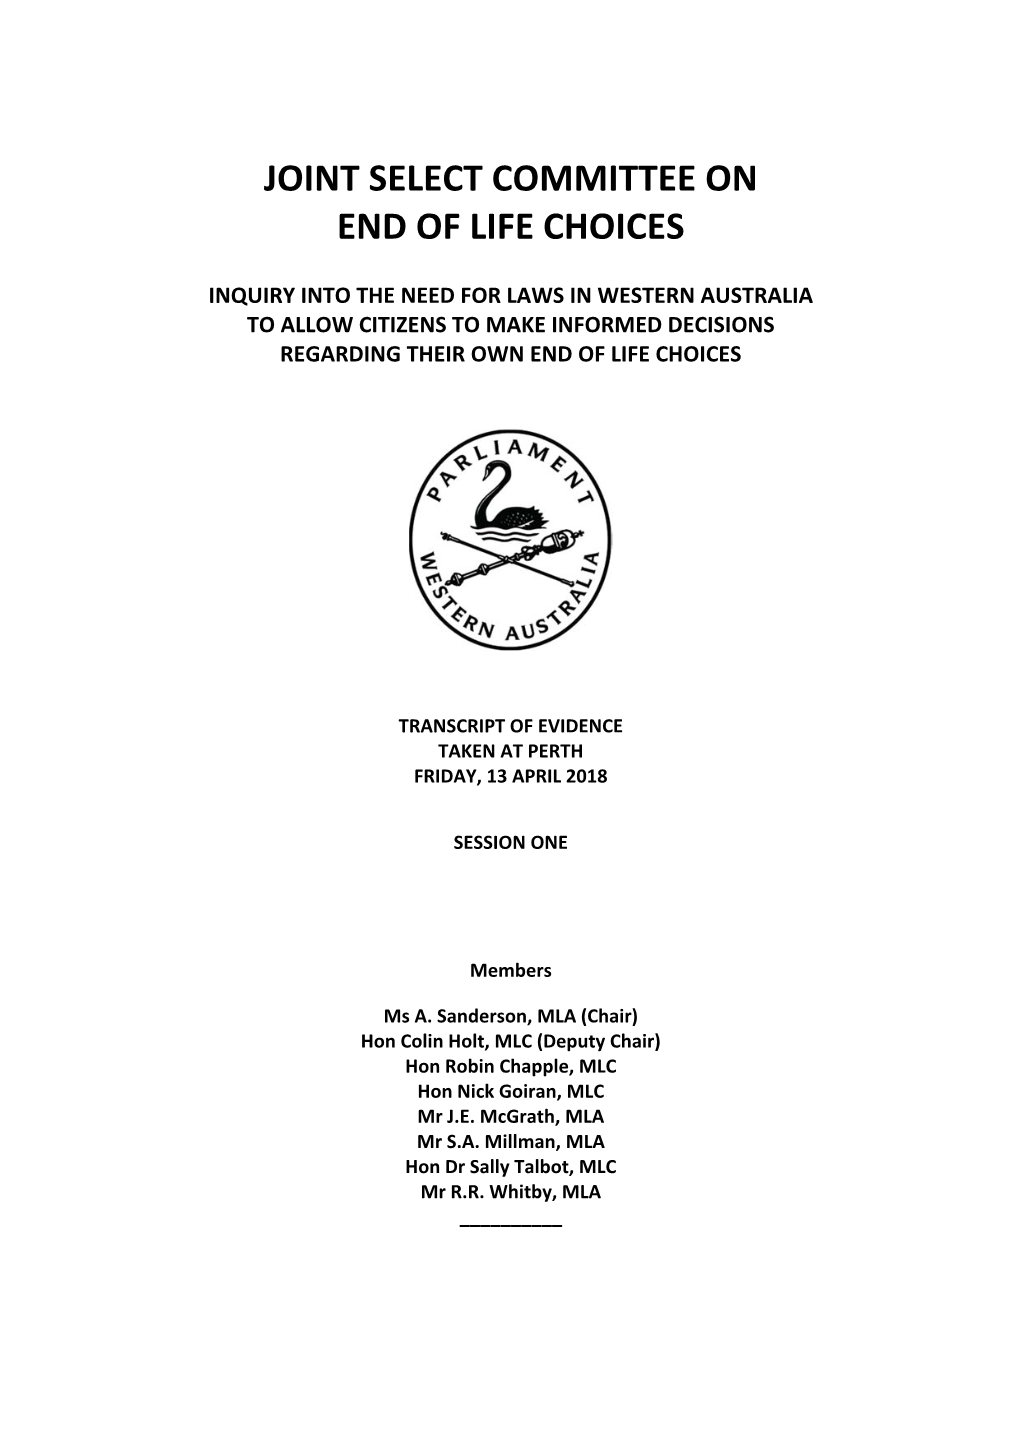 Joint Select Committee on End of Life Choices